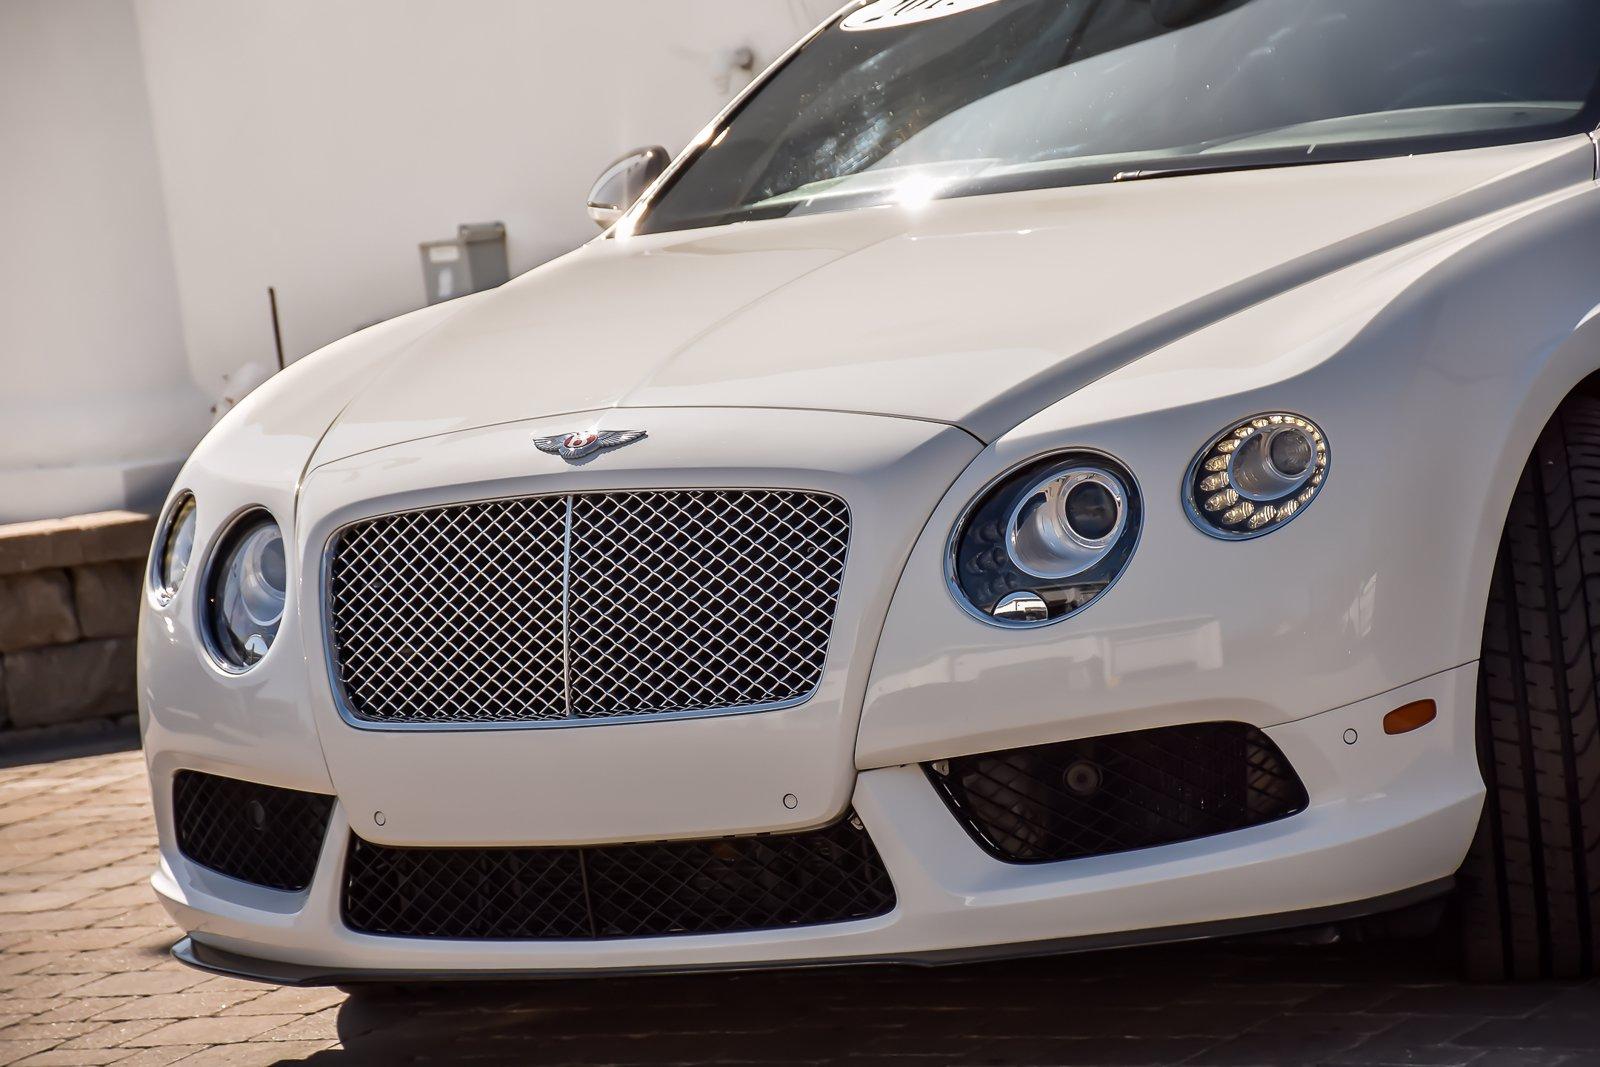 Used 2015 Bentley Continental GT V8 S Mulliner | Downers Grove, IL